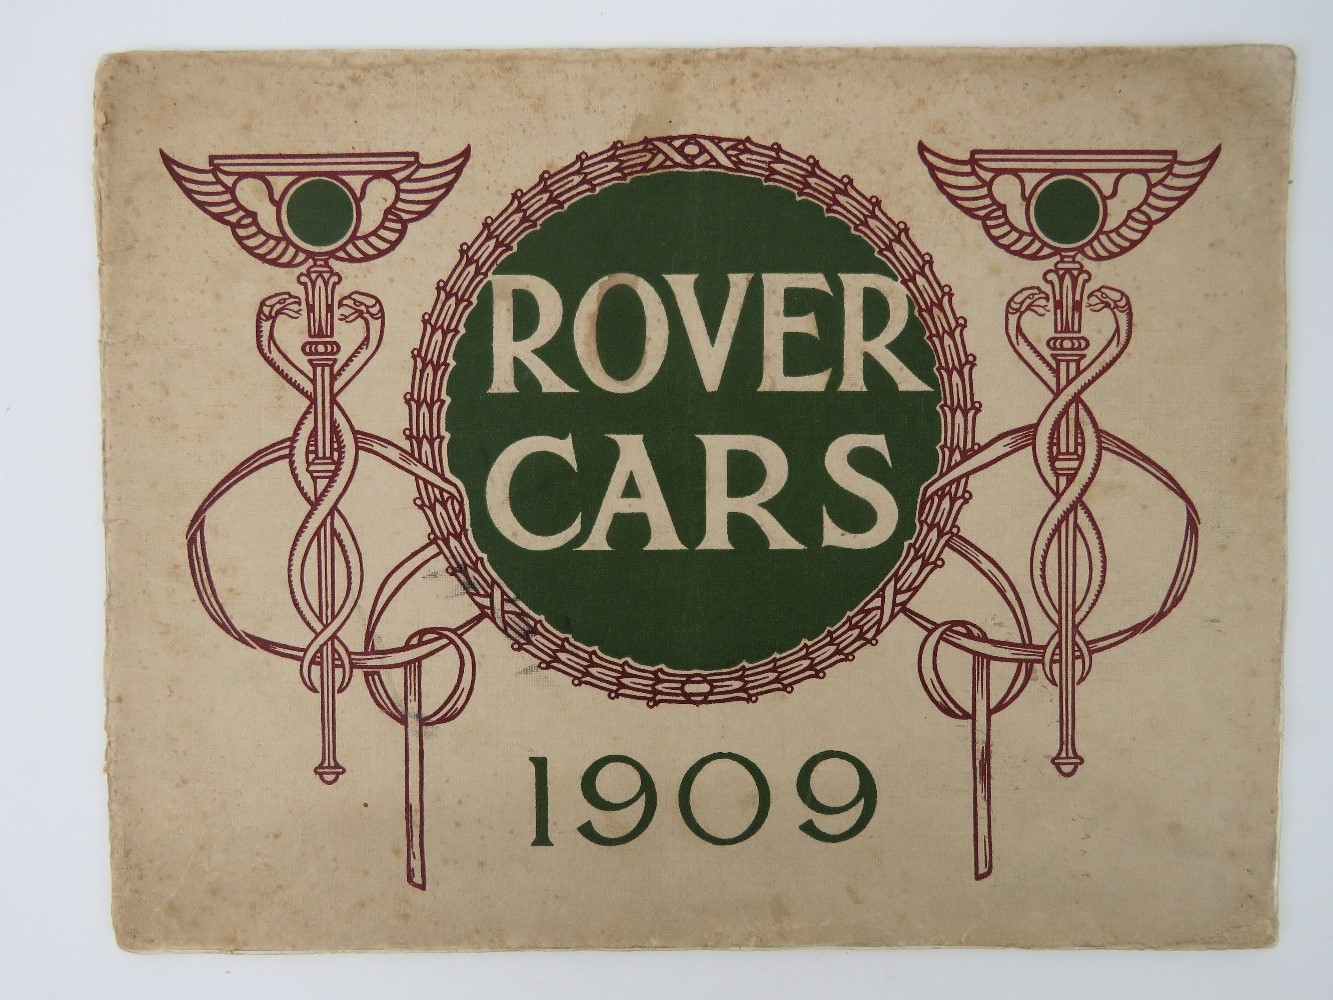 Rover Cars 1909 - A scarce early sales catalogue;